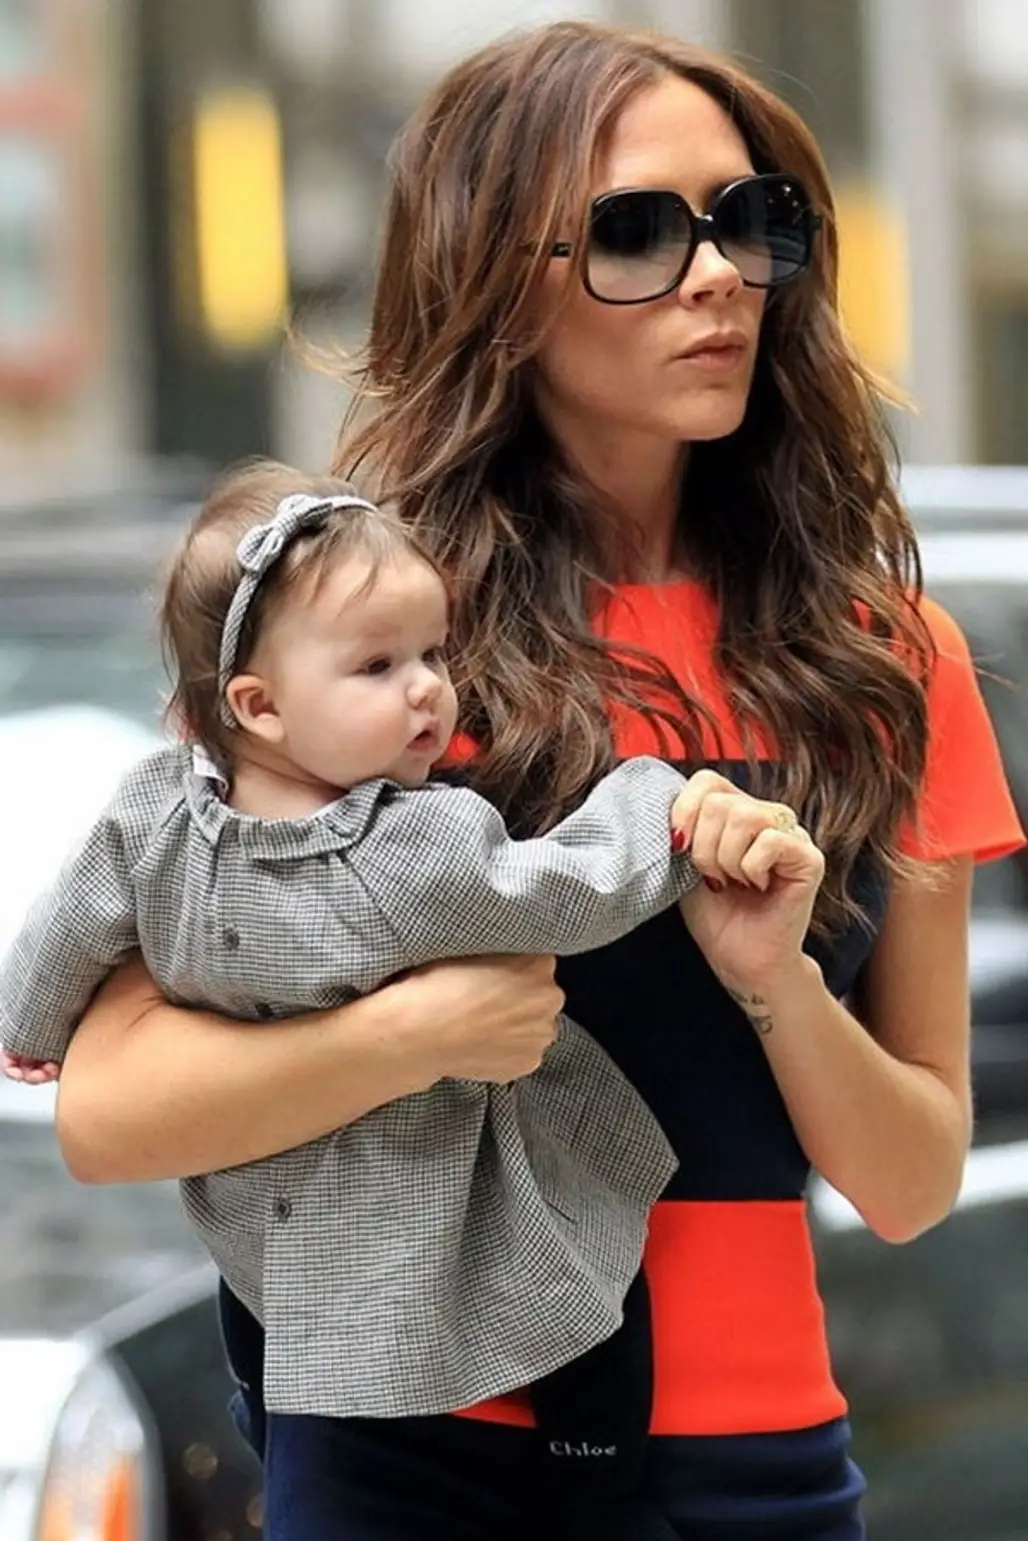 13 Less Known Facts about Victoria Beckham That May Surprise You ...